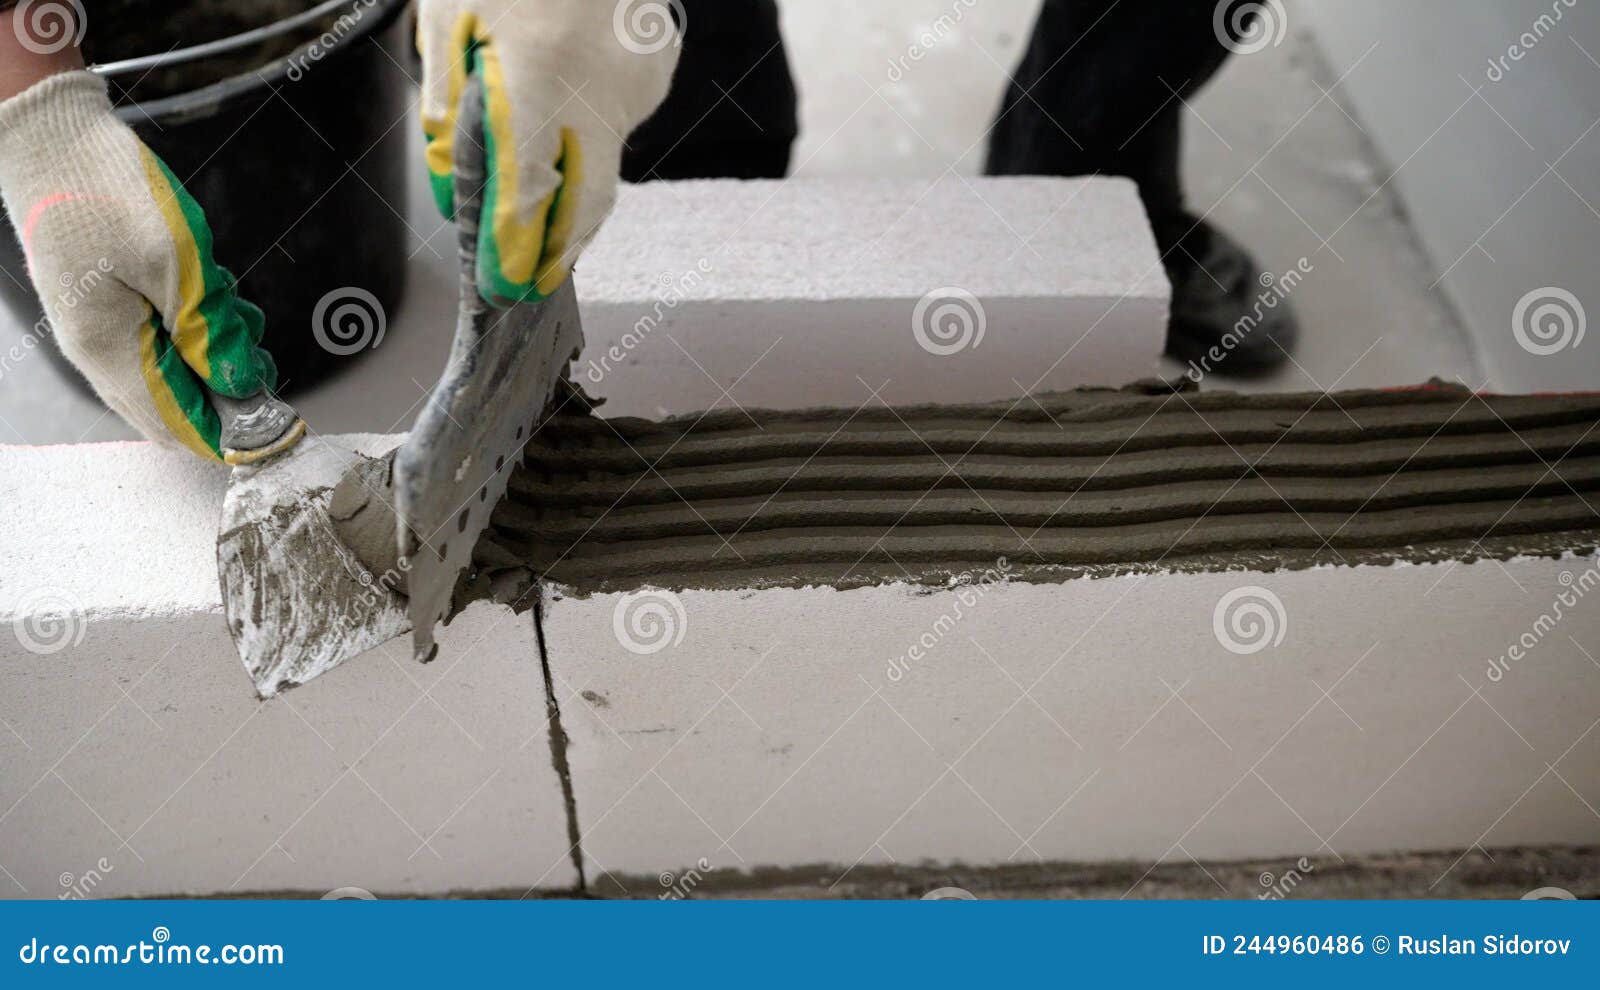 builder-mason working with aerated concrete blocks. building walls, placing bricks on a construction site, engineering